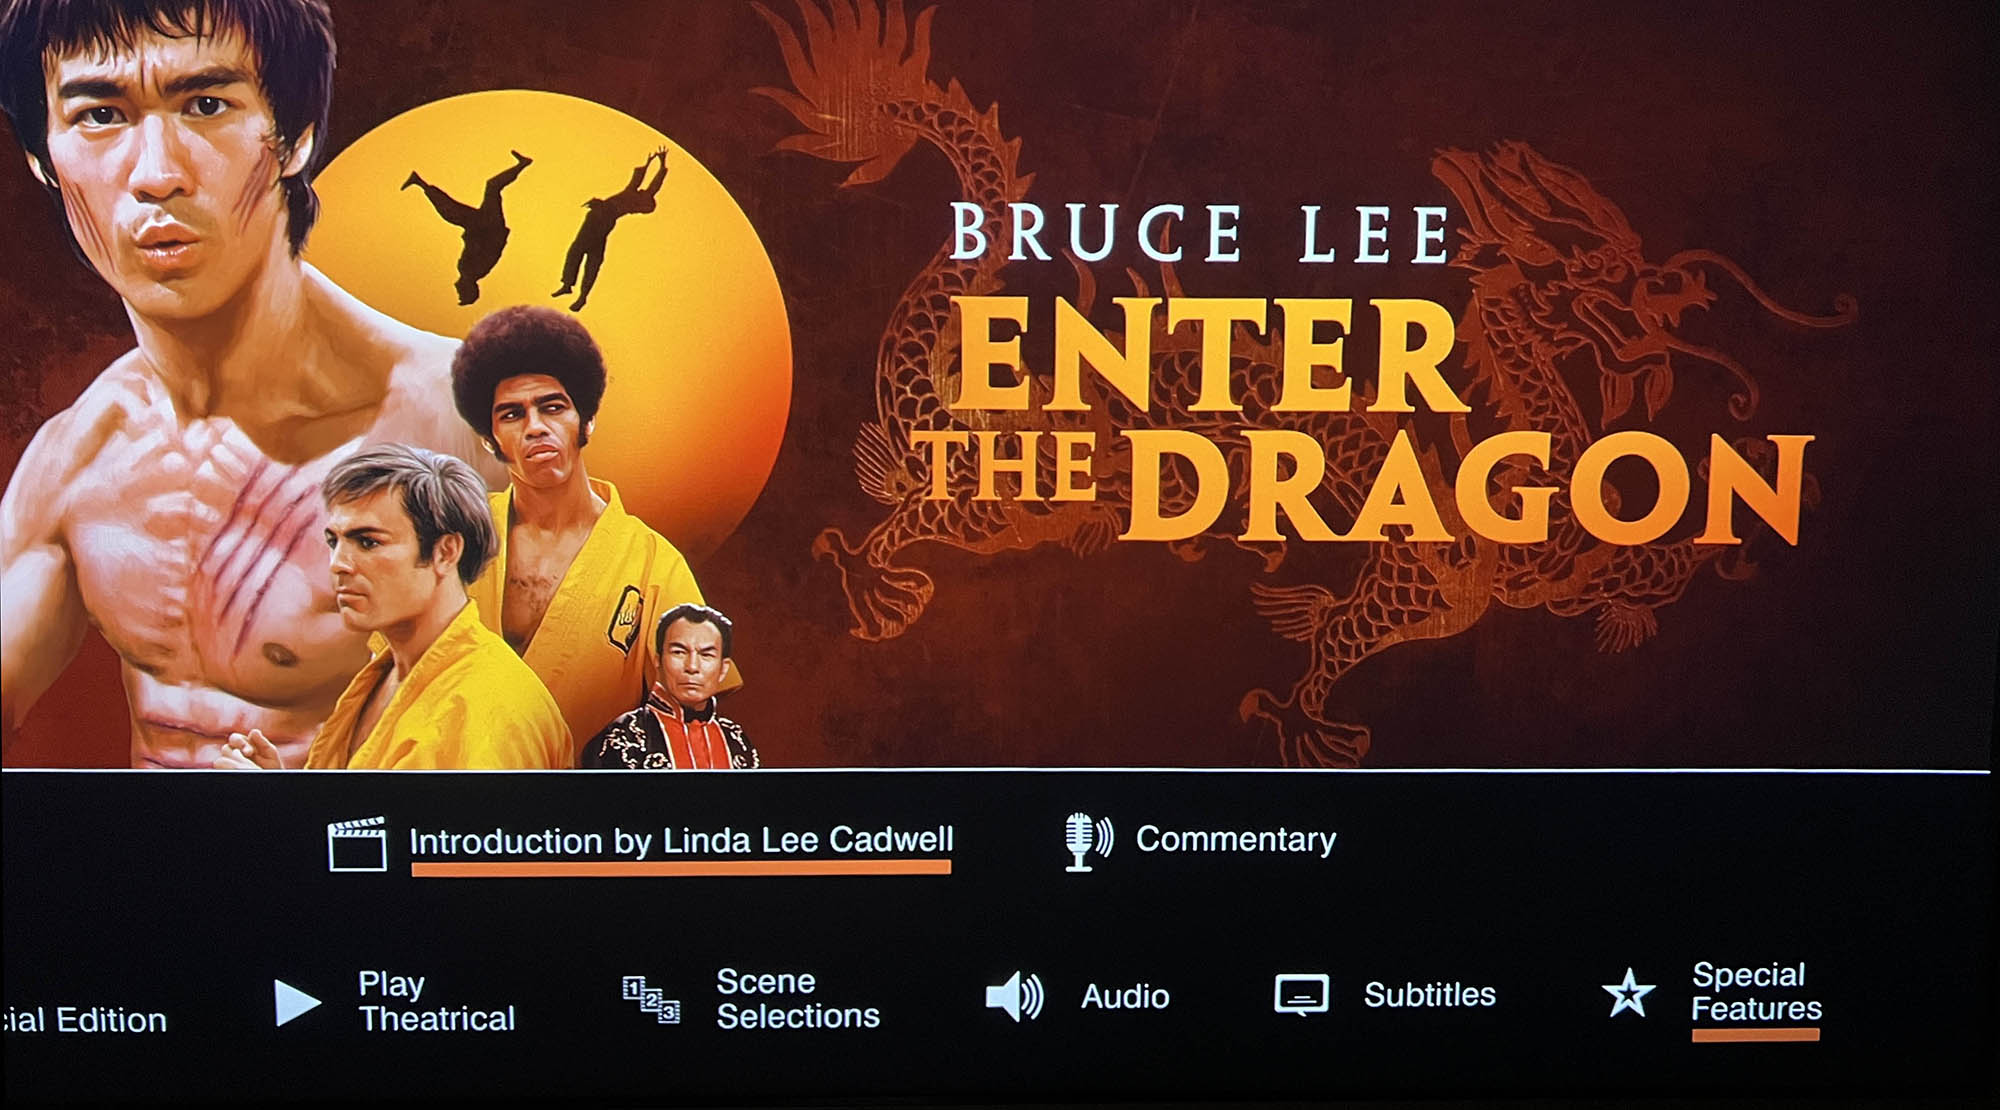 Enter the Dragon 4k Blu-ray special features 2000px